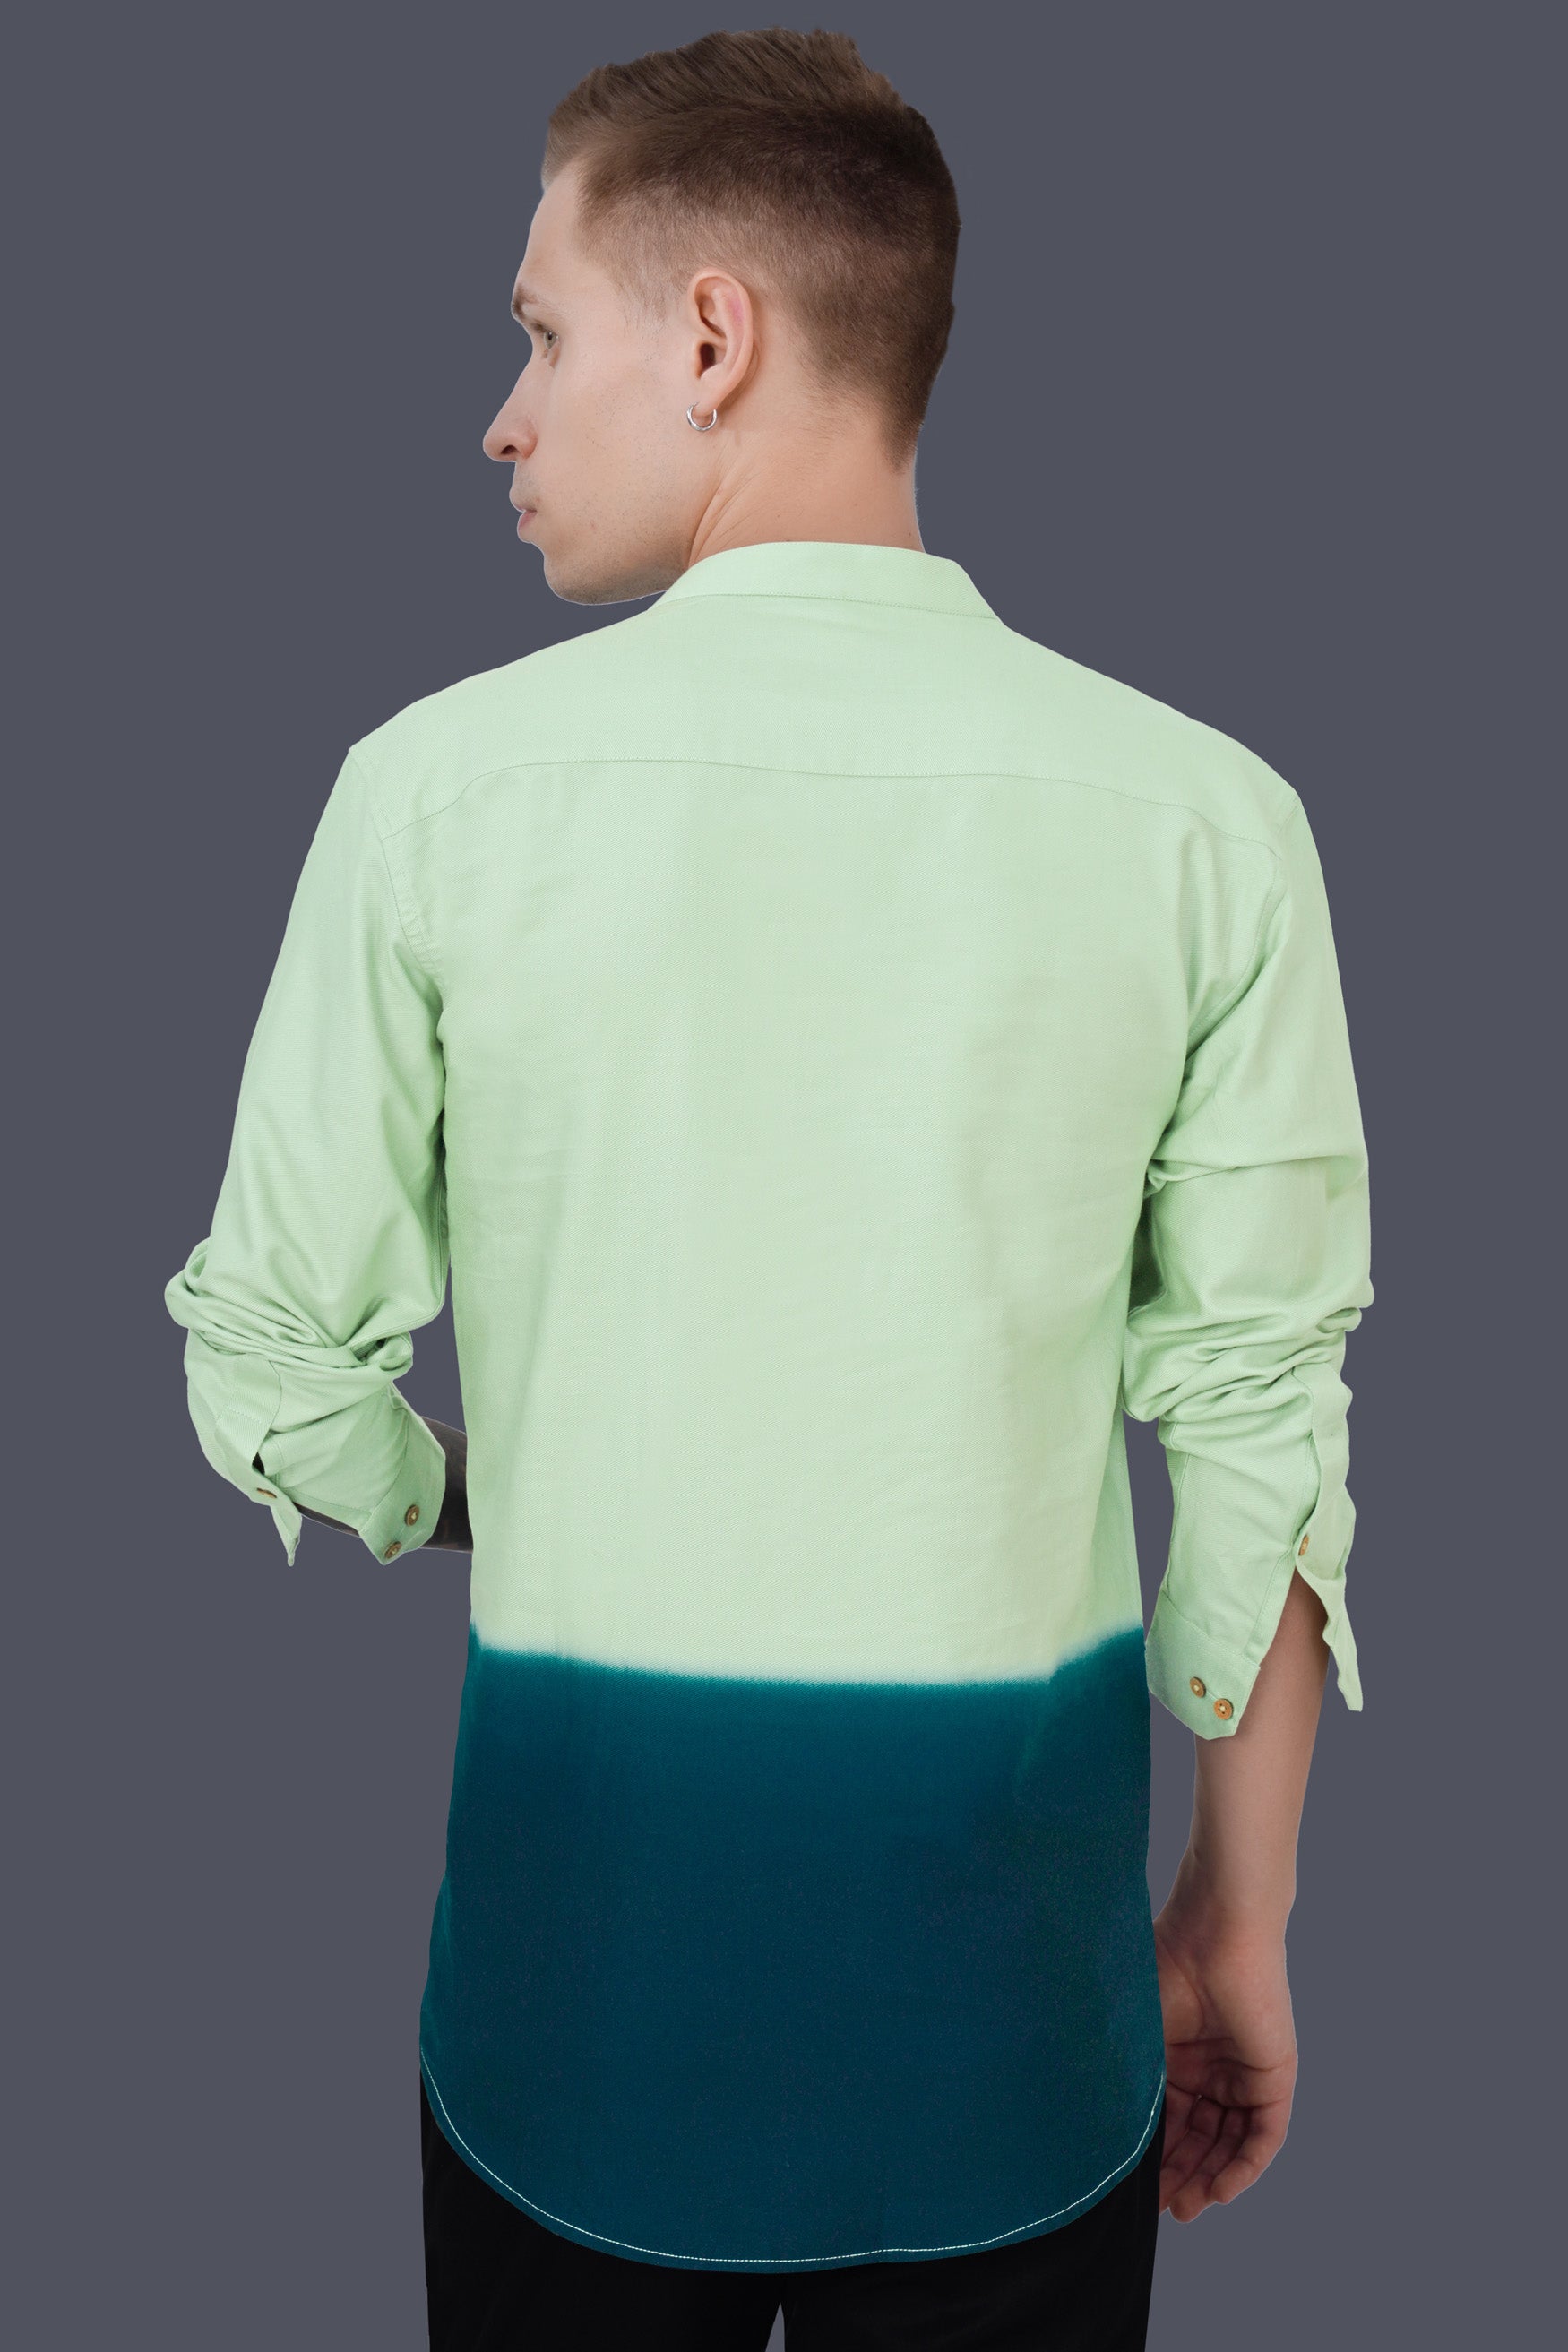 Envy Green and Prussian Blue Twill Premium Cotton Kurta Shirt 11757-KS-38, 11757-KS-H-38, 11757-KS-39, 11757-KS-H-39, 11757-KS-40, 11757-KS-H-40, 11757-KS-42, 11757-KS-H-42, 11757-KS-44, 11757-KS-H-44, 11757-KS-46, 11757-KS-H-46, 11757-KS-48, 11757-KS-H-48, 11757-KS-50, 11757-KS-H-50, 11757-KS-52, 11757-KS-H-52